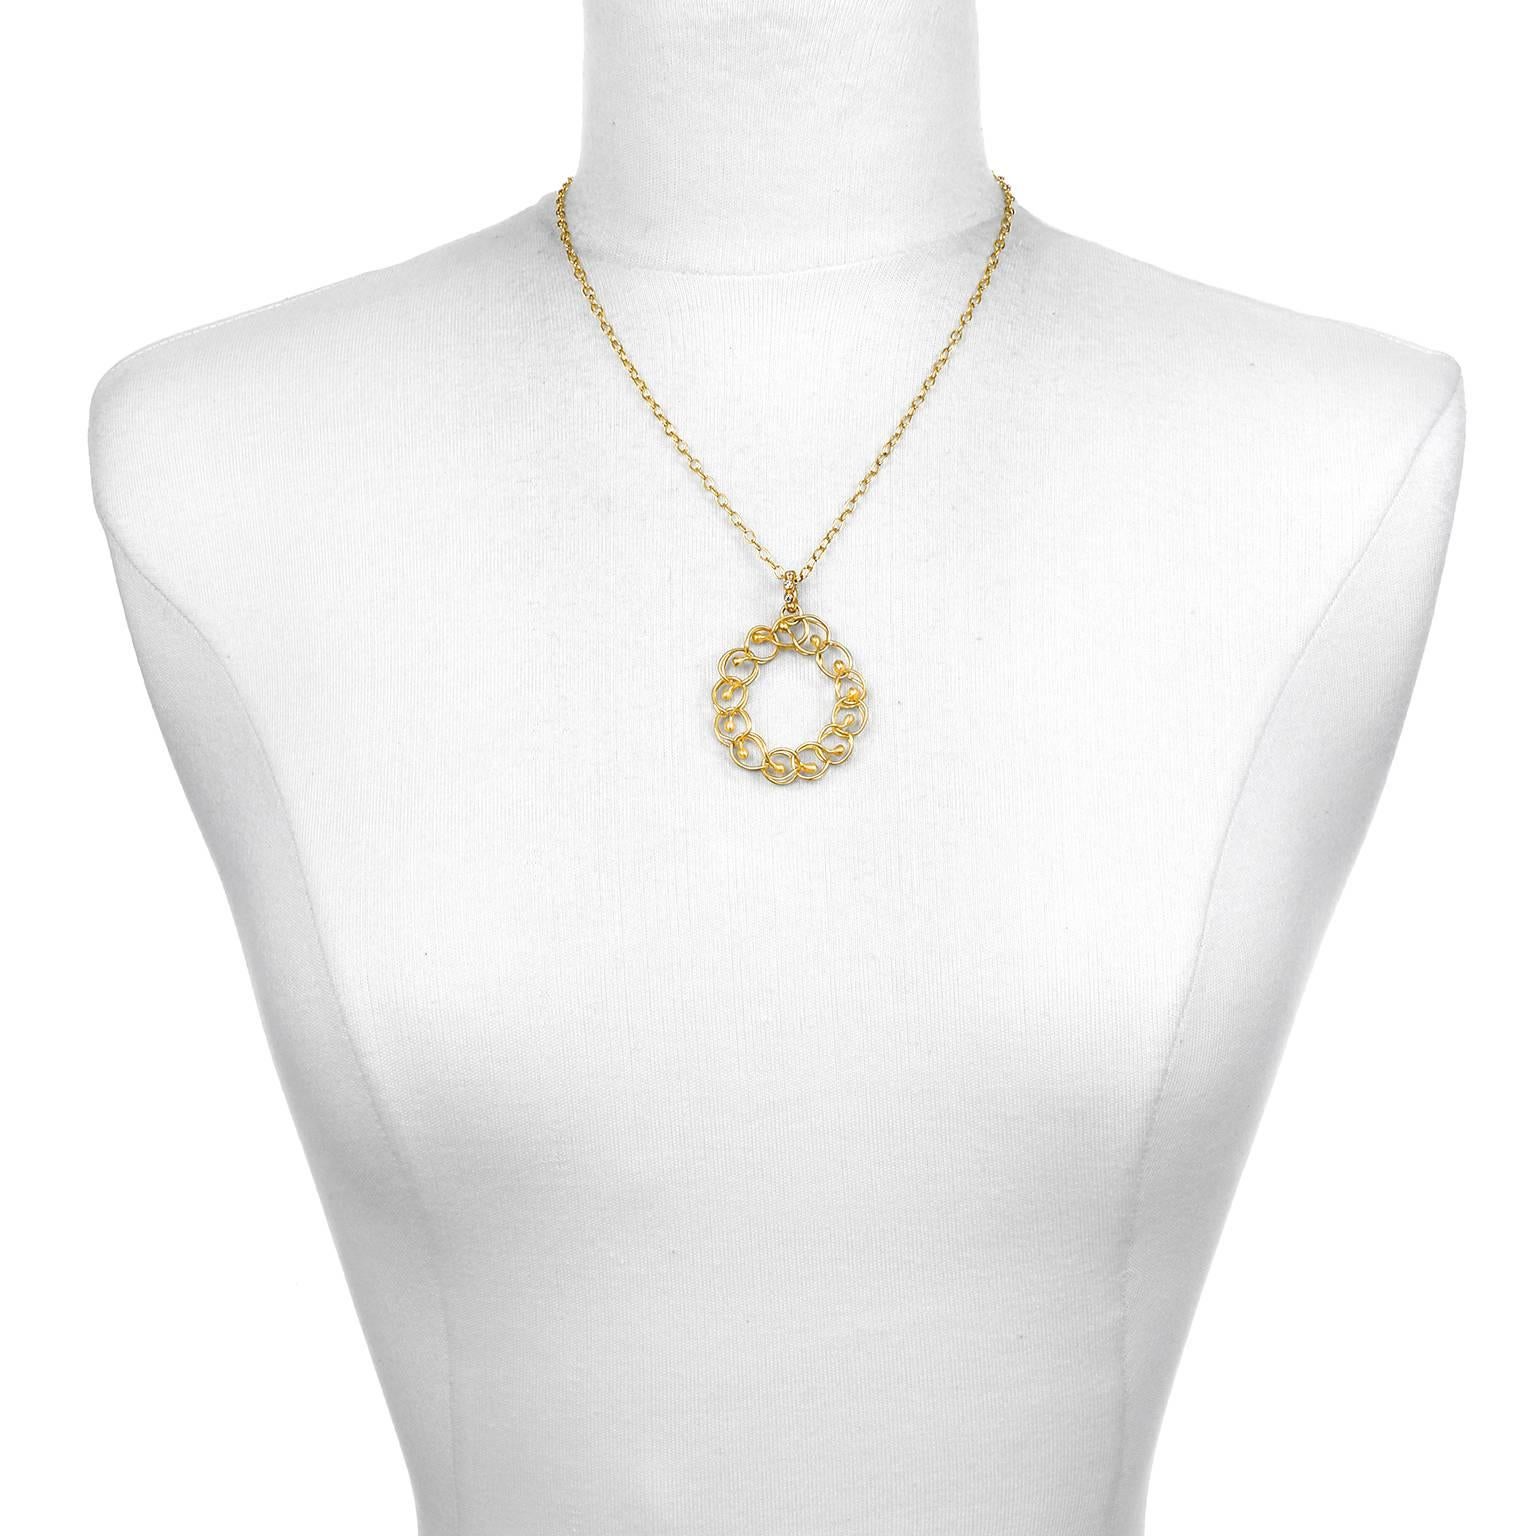 Handwoven in 22k gold, Faye Kim's center ball granulation circle pendant with diamond bail is timeless and stylish.  The chain is also handmade in 22k gold, elevating the classic cable chain to the next level. The look is pure understated